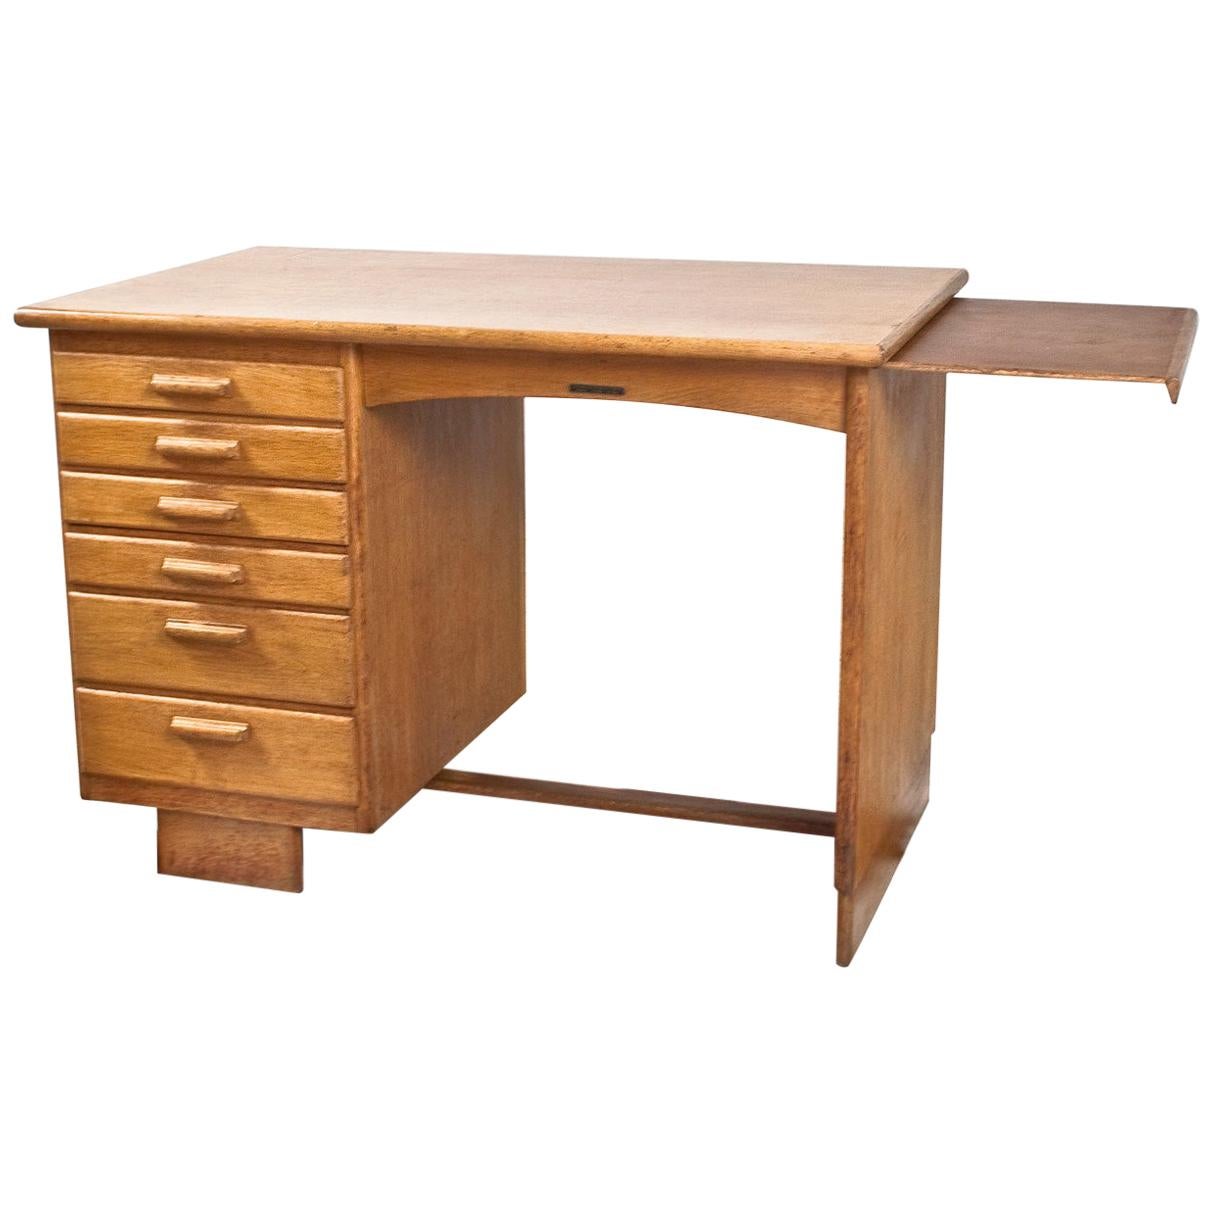 Art Deco Writing Table and Petit Desk in Solid Oak, Dutch Modernist, 1930s